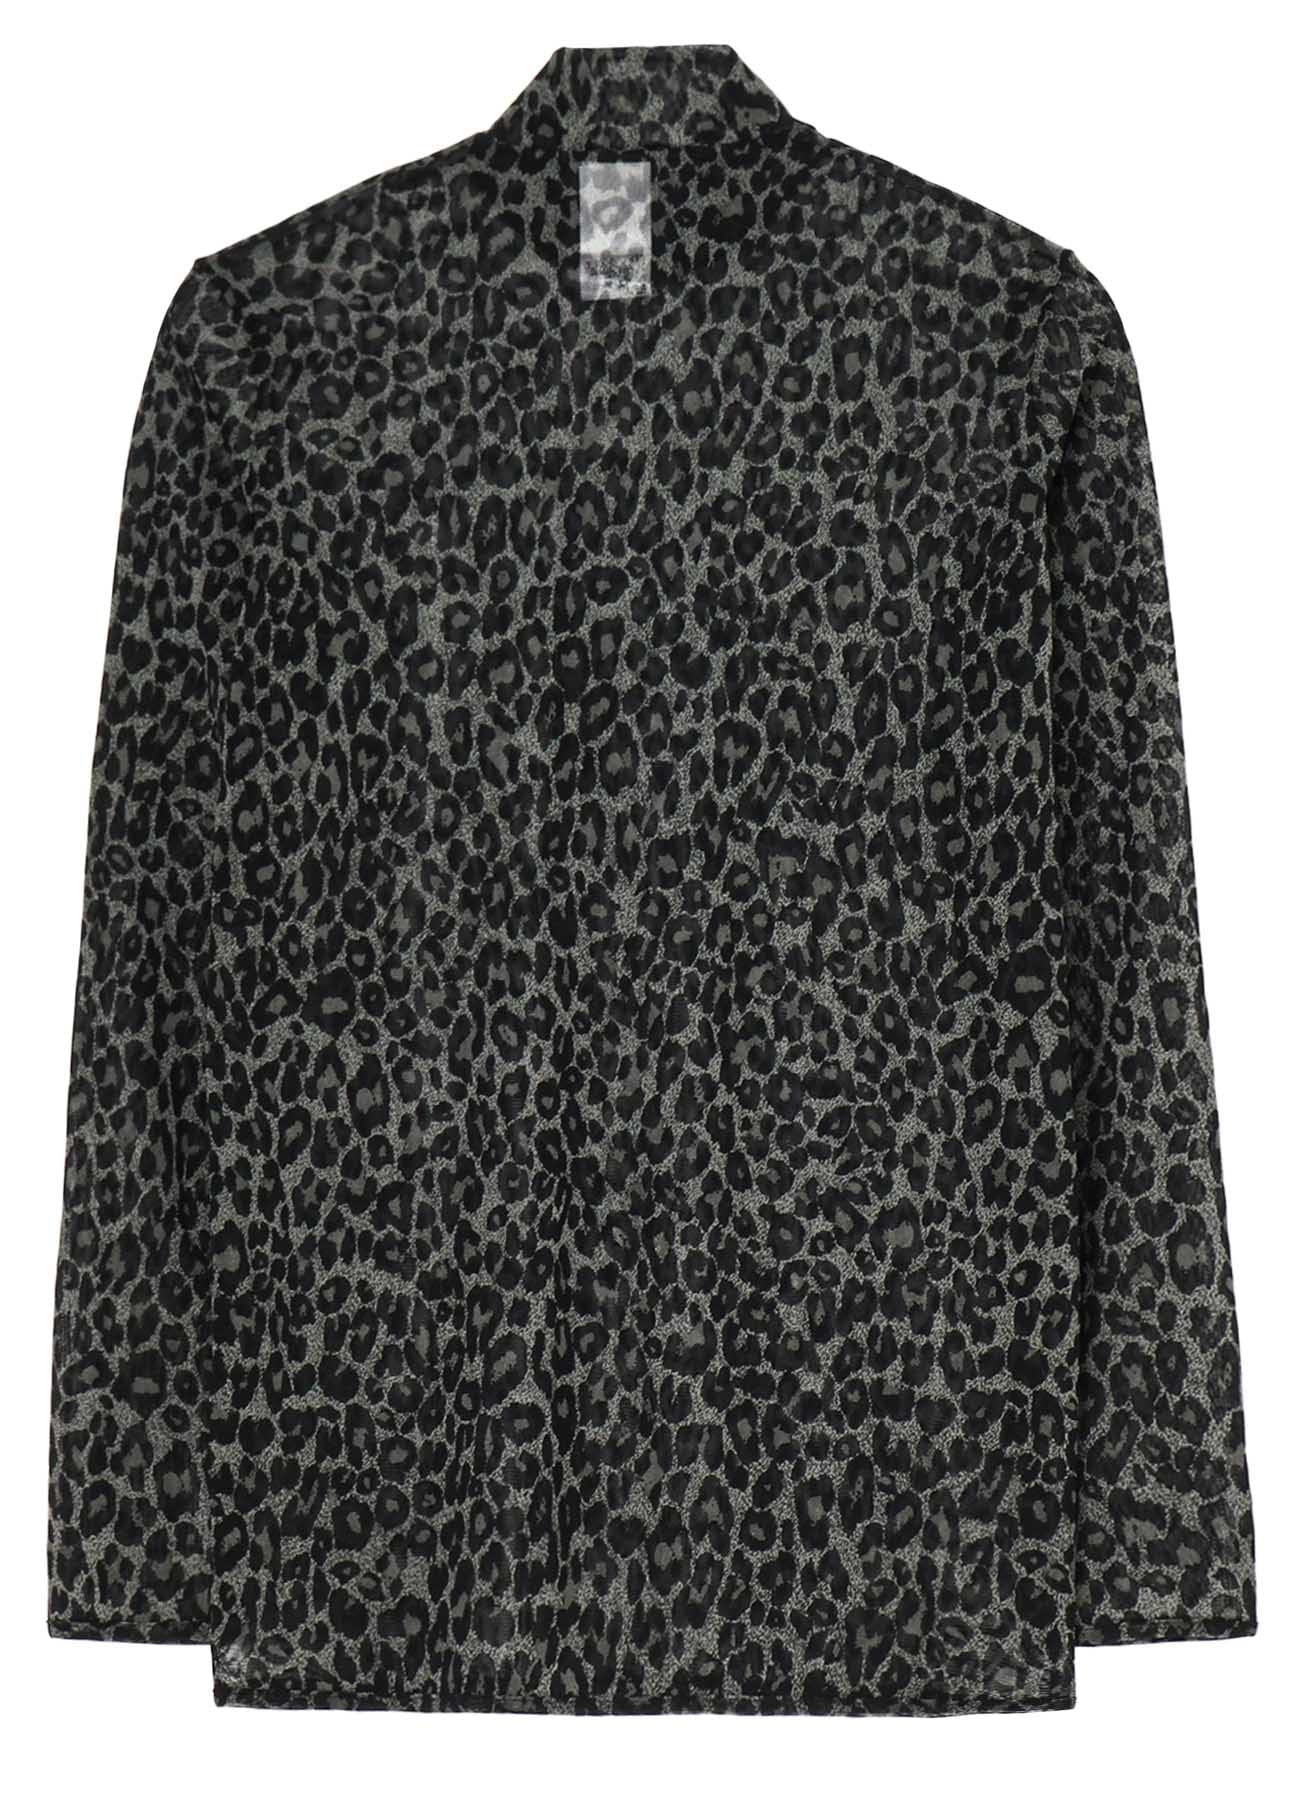 LEOPARD TULLE HIGH NECK PULLOVER